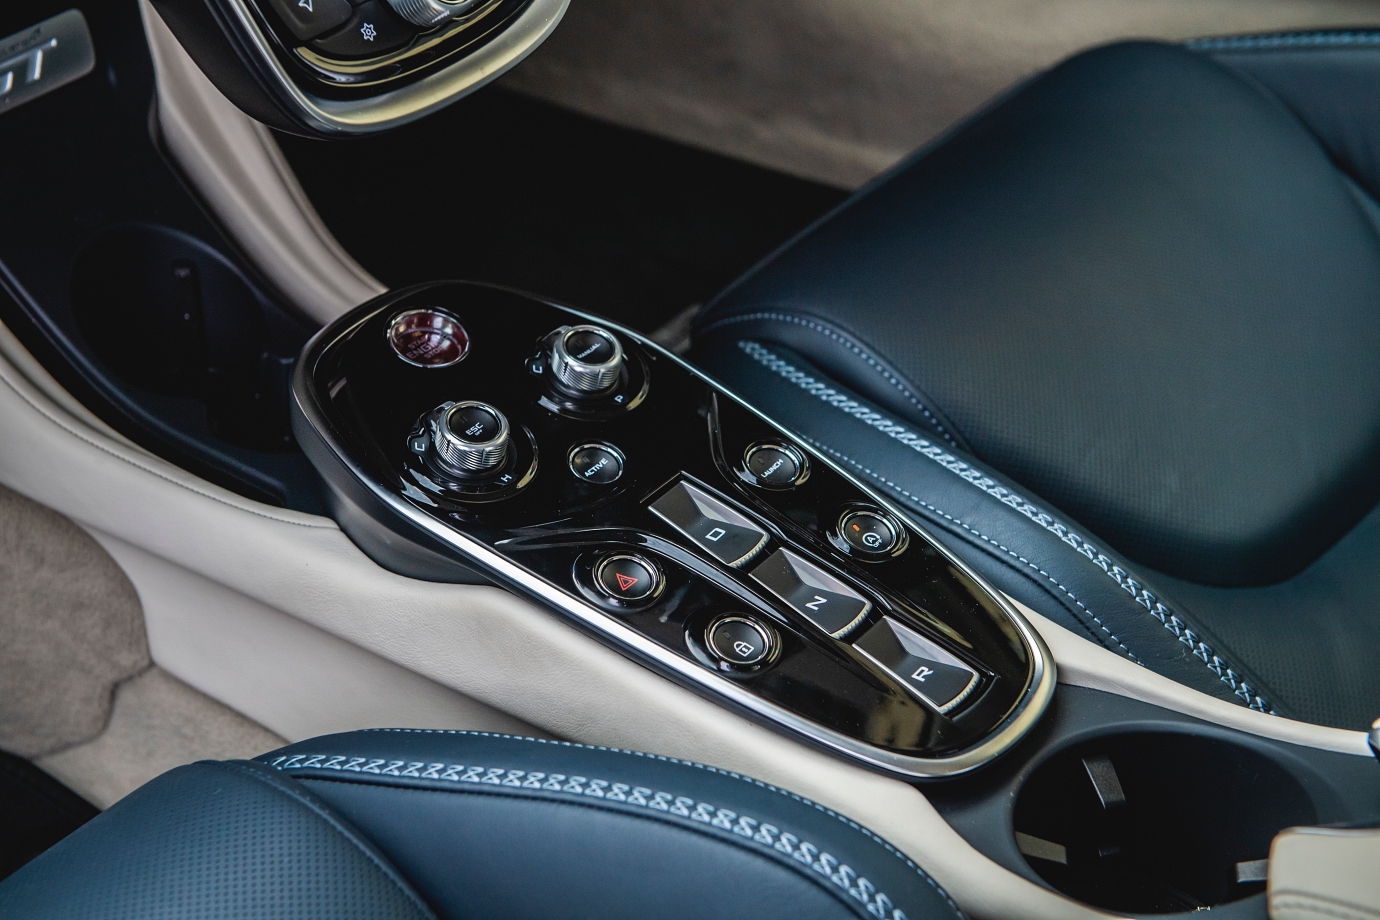 Engage the 'Active Panel' to toggle between Engine & Transmission modes